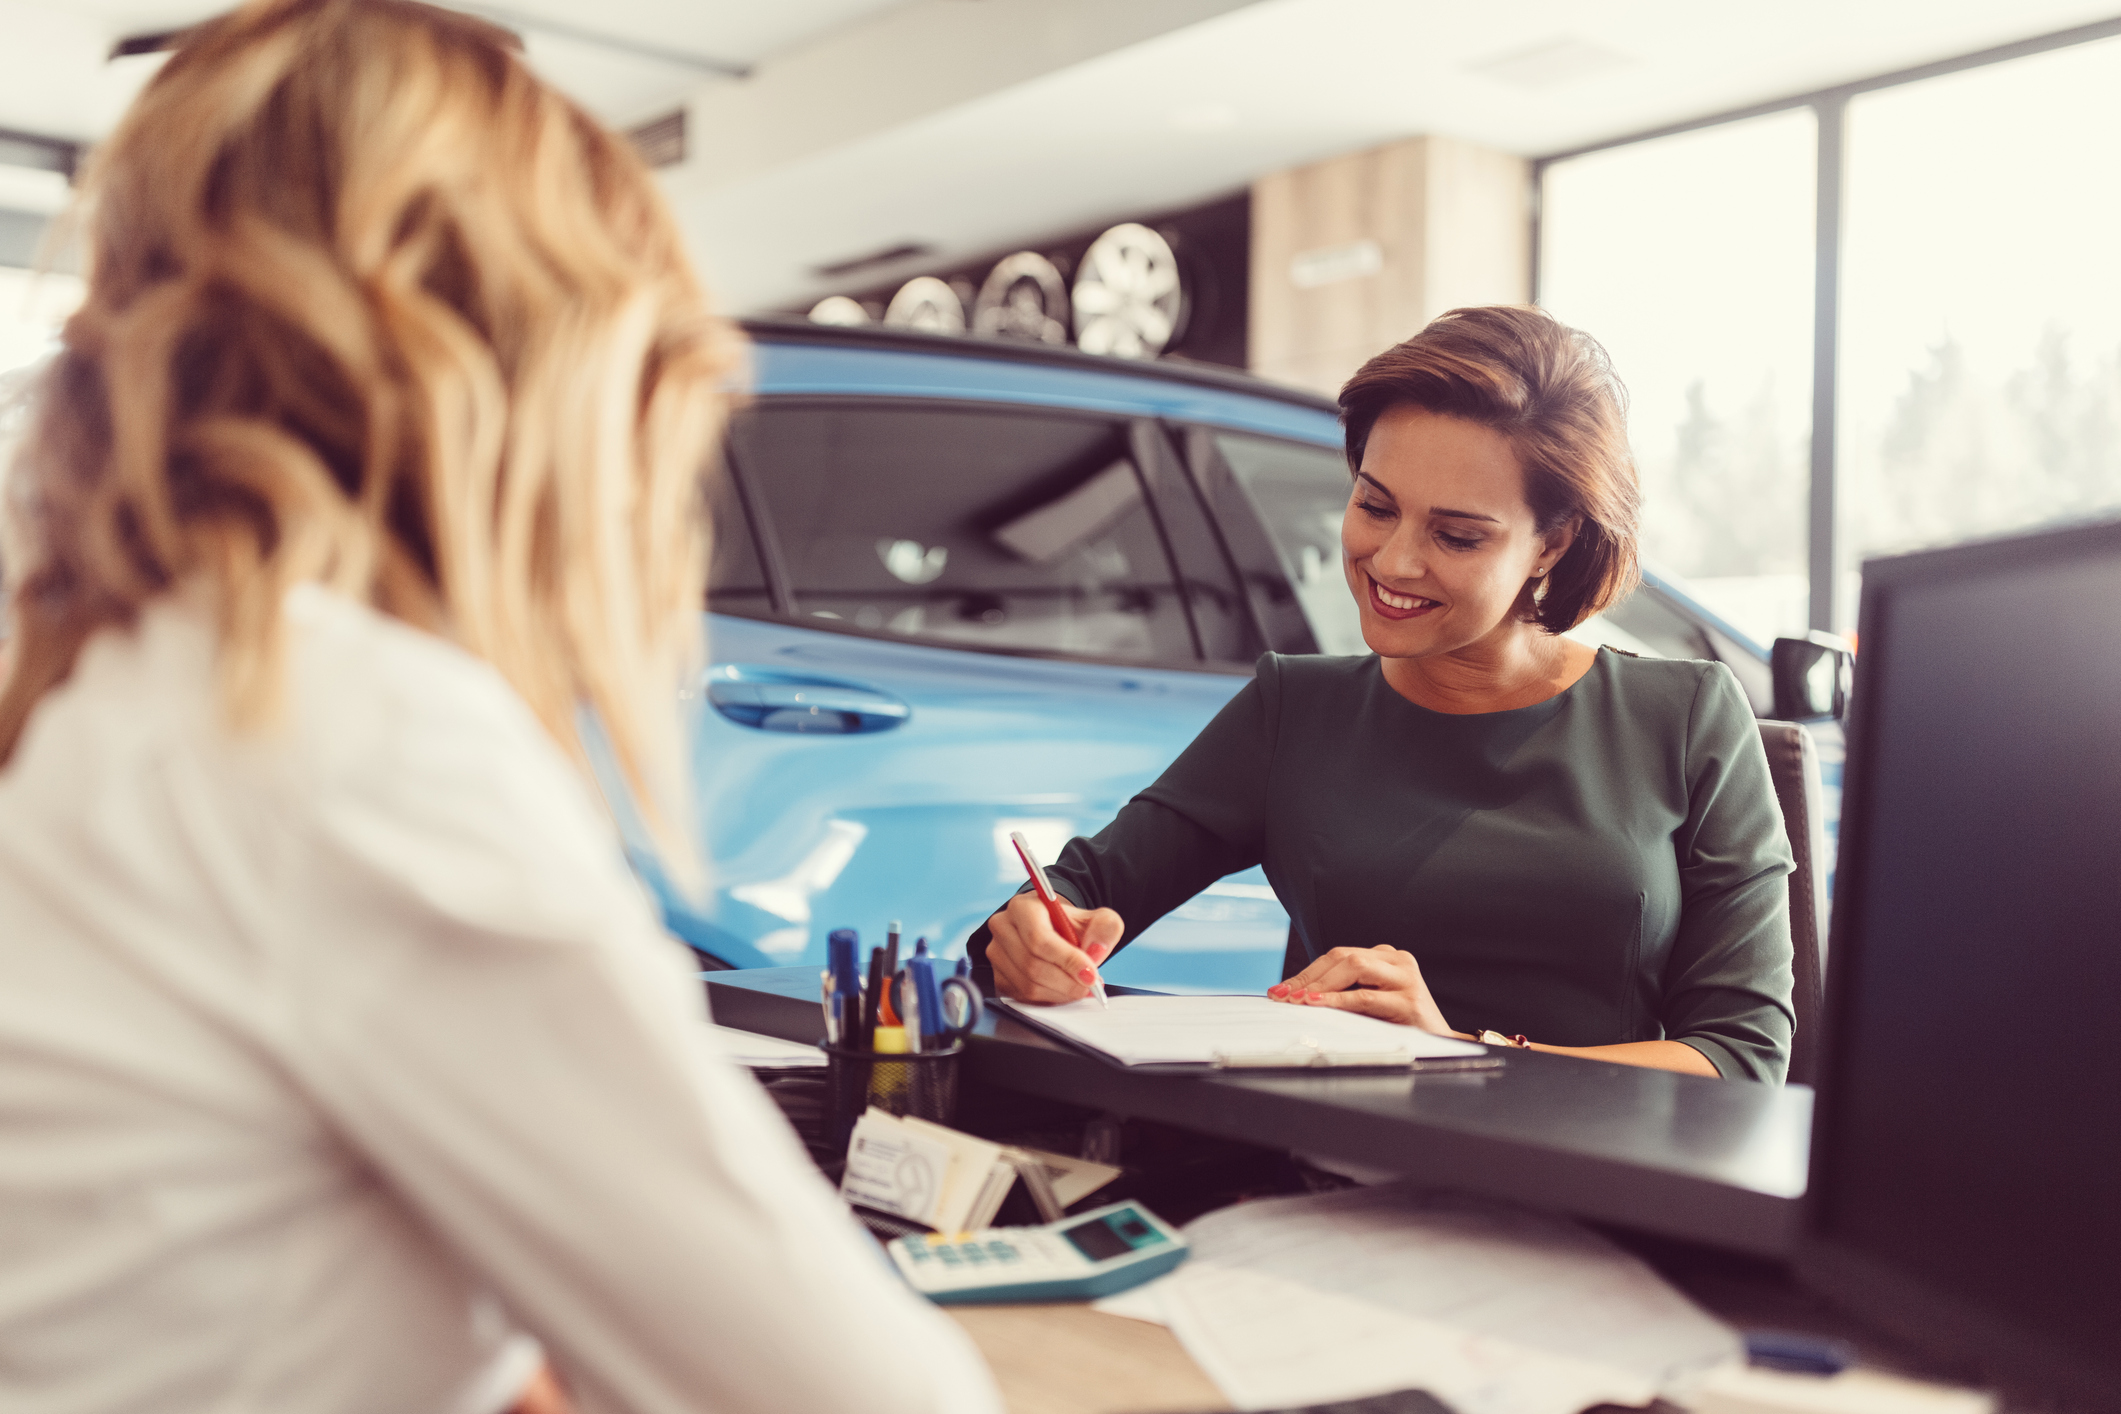 The Responsible Way to Apply for a New Car Loan